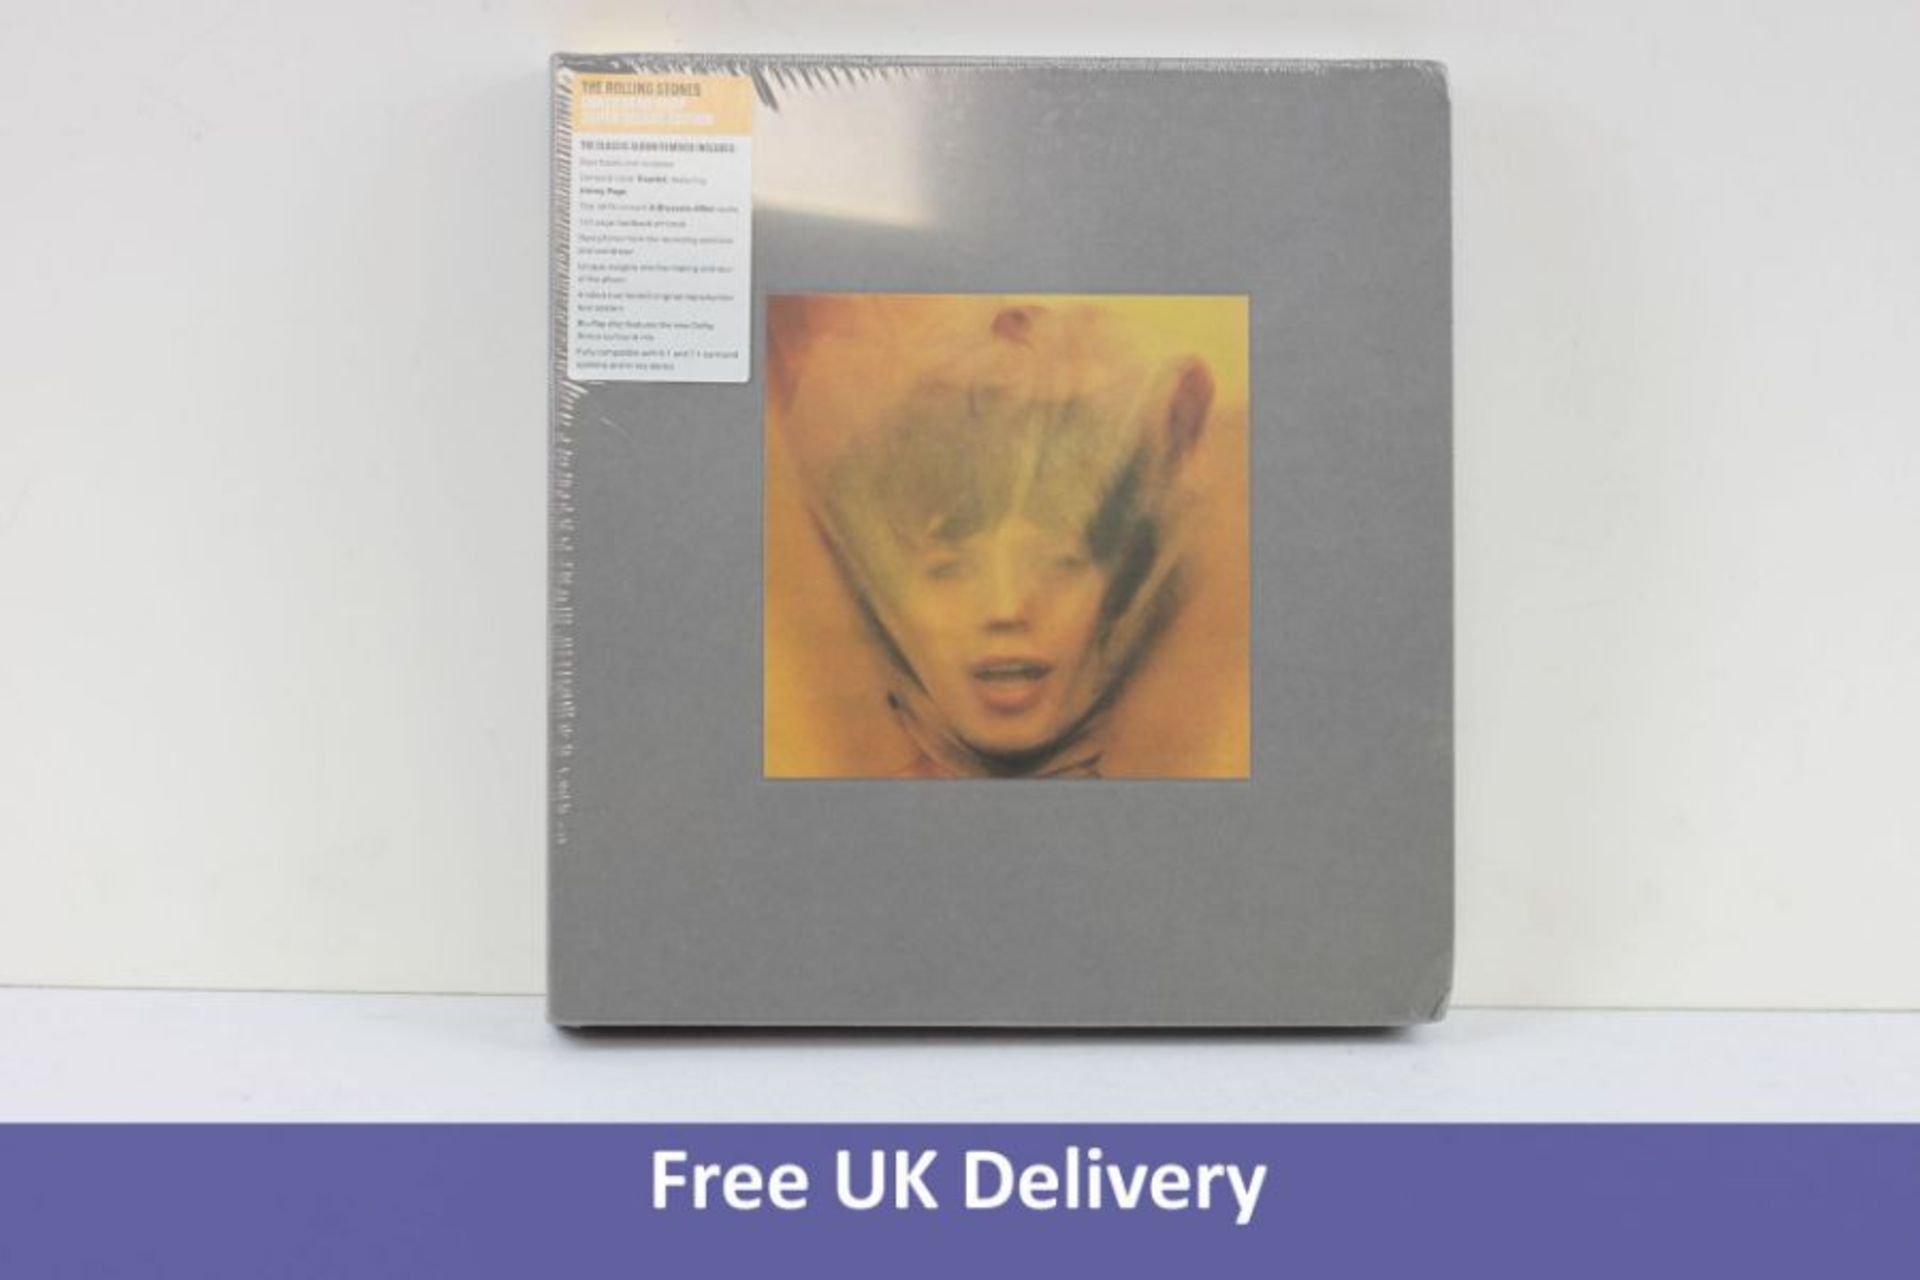 The Rolling Stones Goats Head Soup 3CD/Blu-ray Super Deluxe Box Set